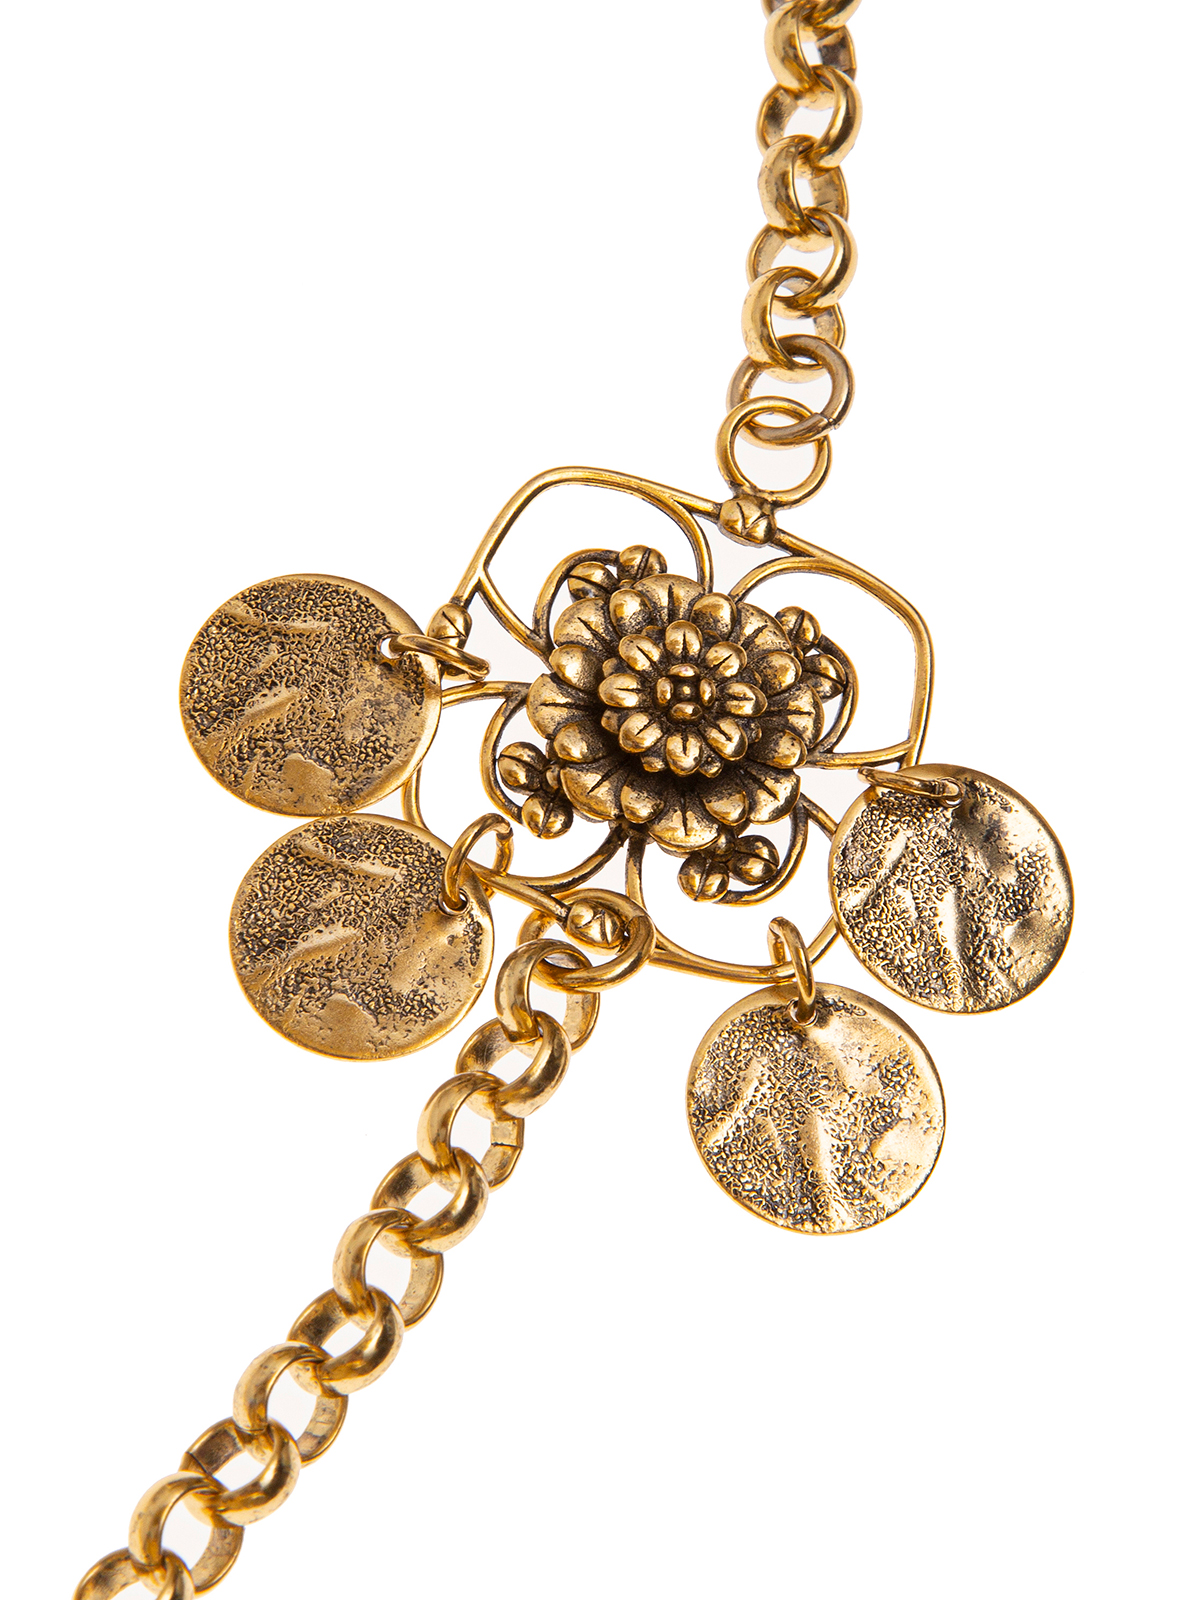 Chain necklace with filigrees and metal flowers